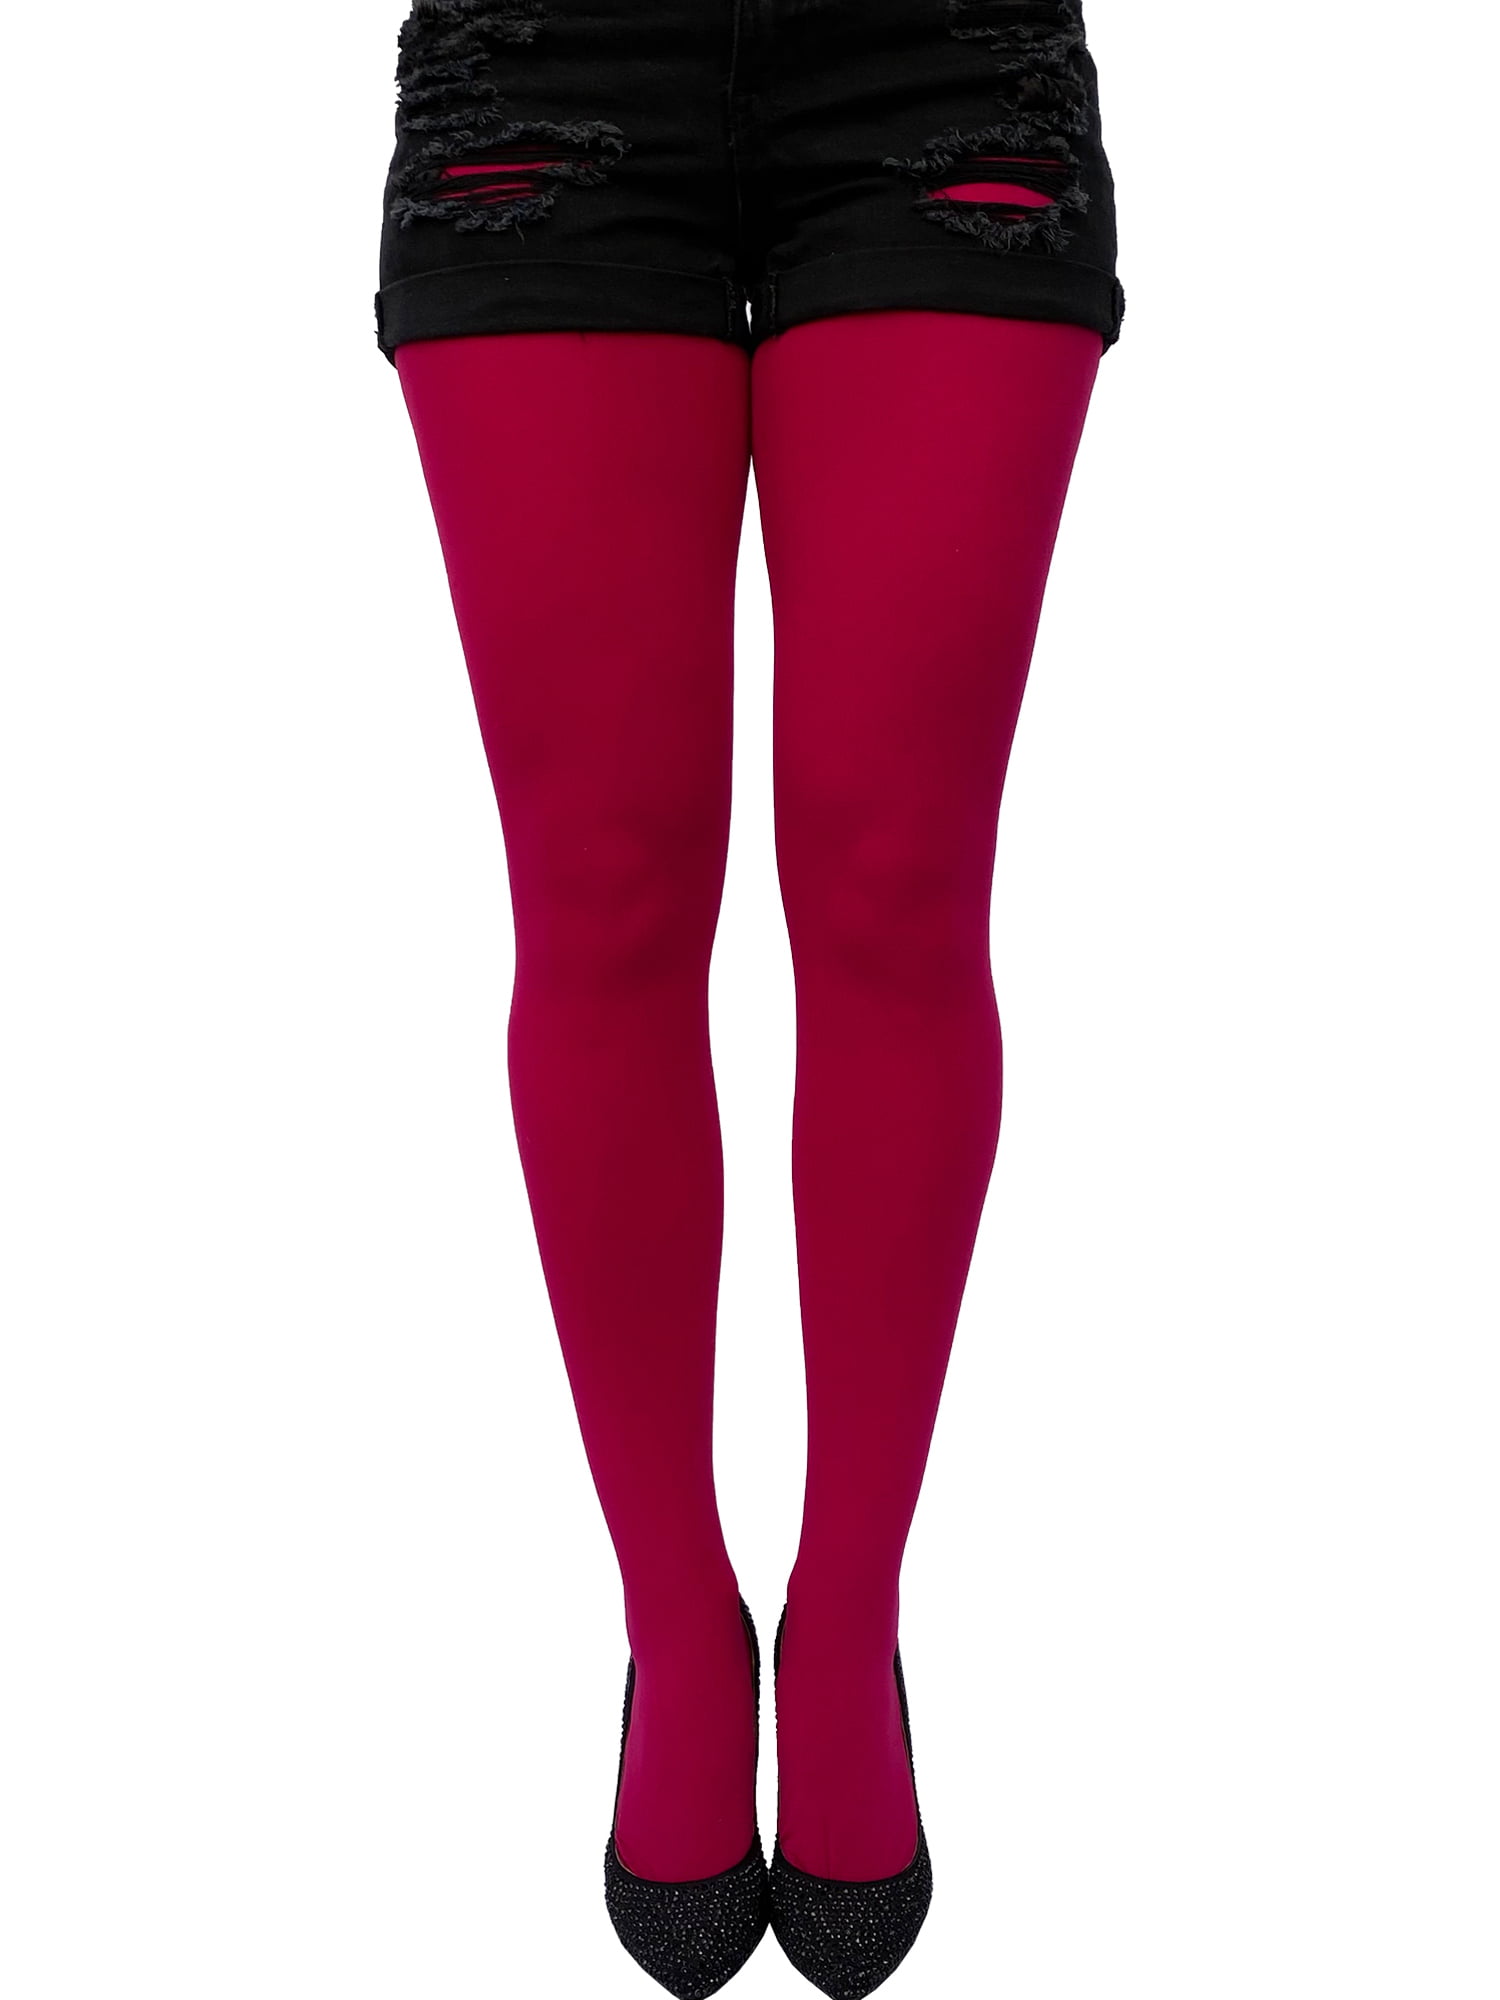 Cherry Pink Opaque Tights Plus Size for Women - from XL to 5XL